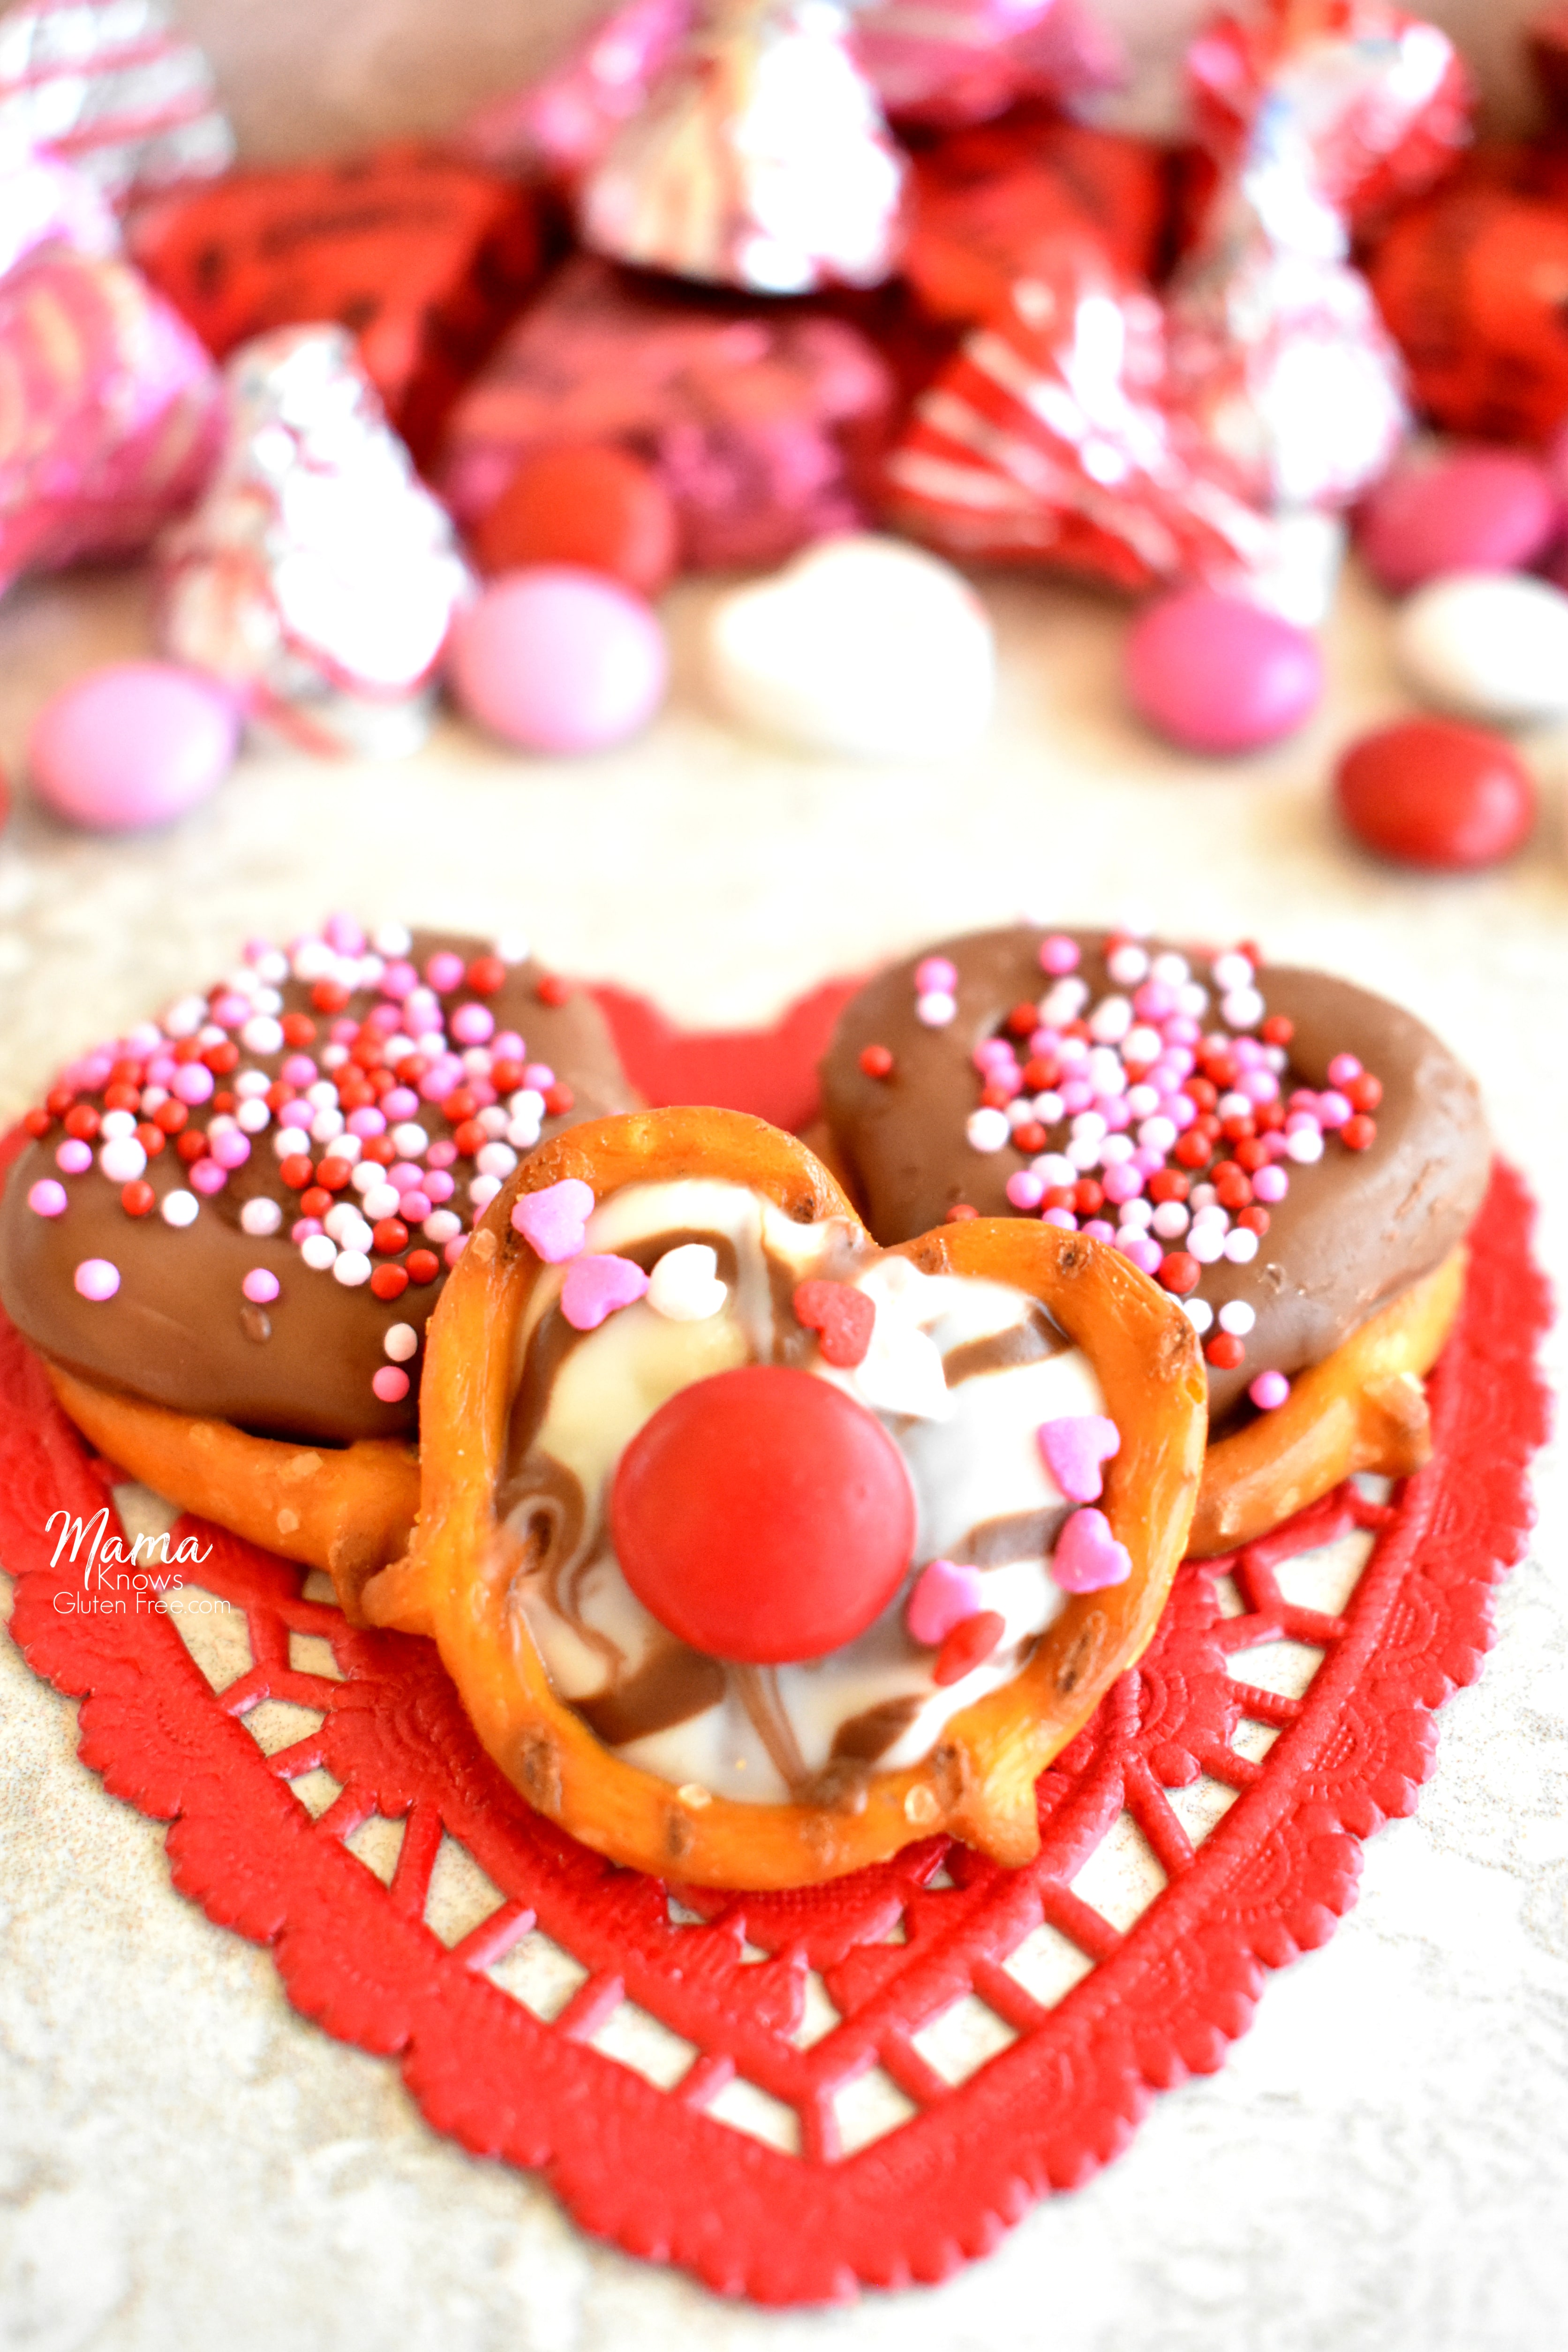 3 gluten-free chocolate covered pretzels on a red heart dollie with candy in the background